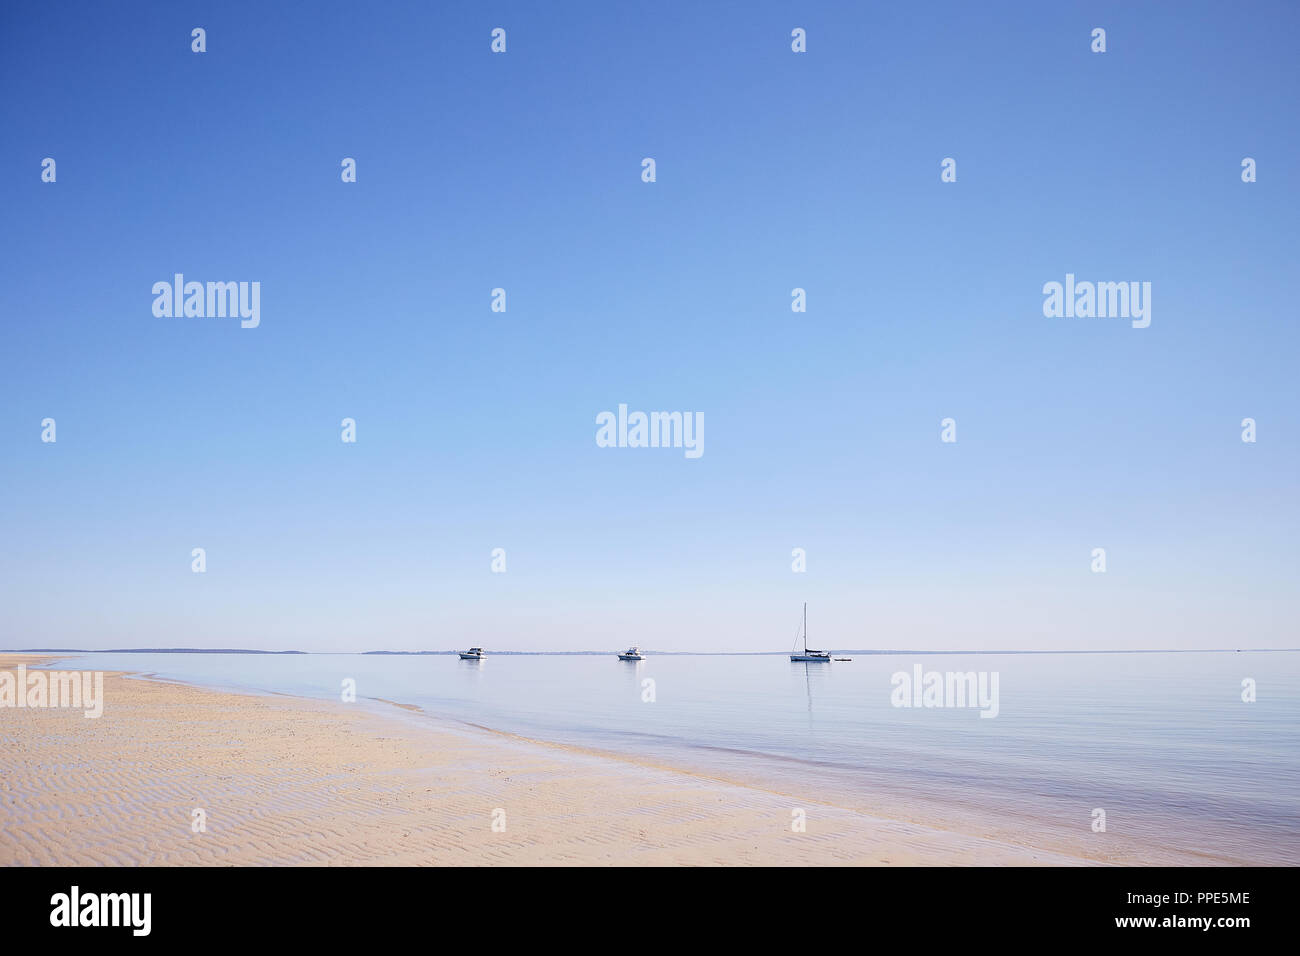 Moored boats in early morning light at Kingfisher Bay, Fraser Island, Queensland Australia Stock Photo